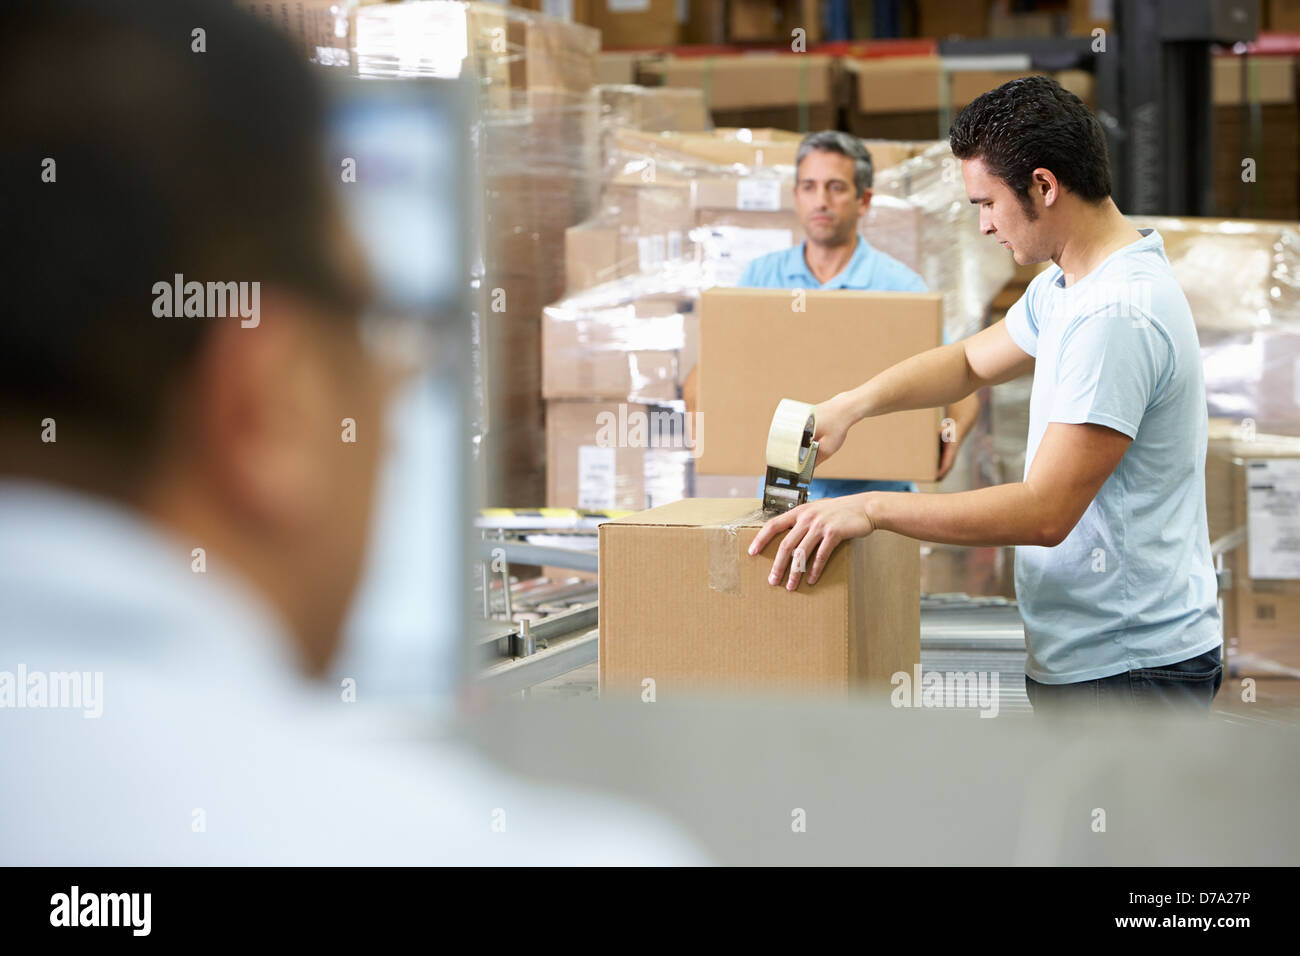 Person At Computer Terminal In Distribution Warehouse Stock Photo